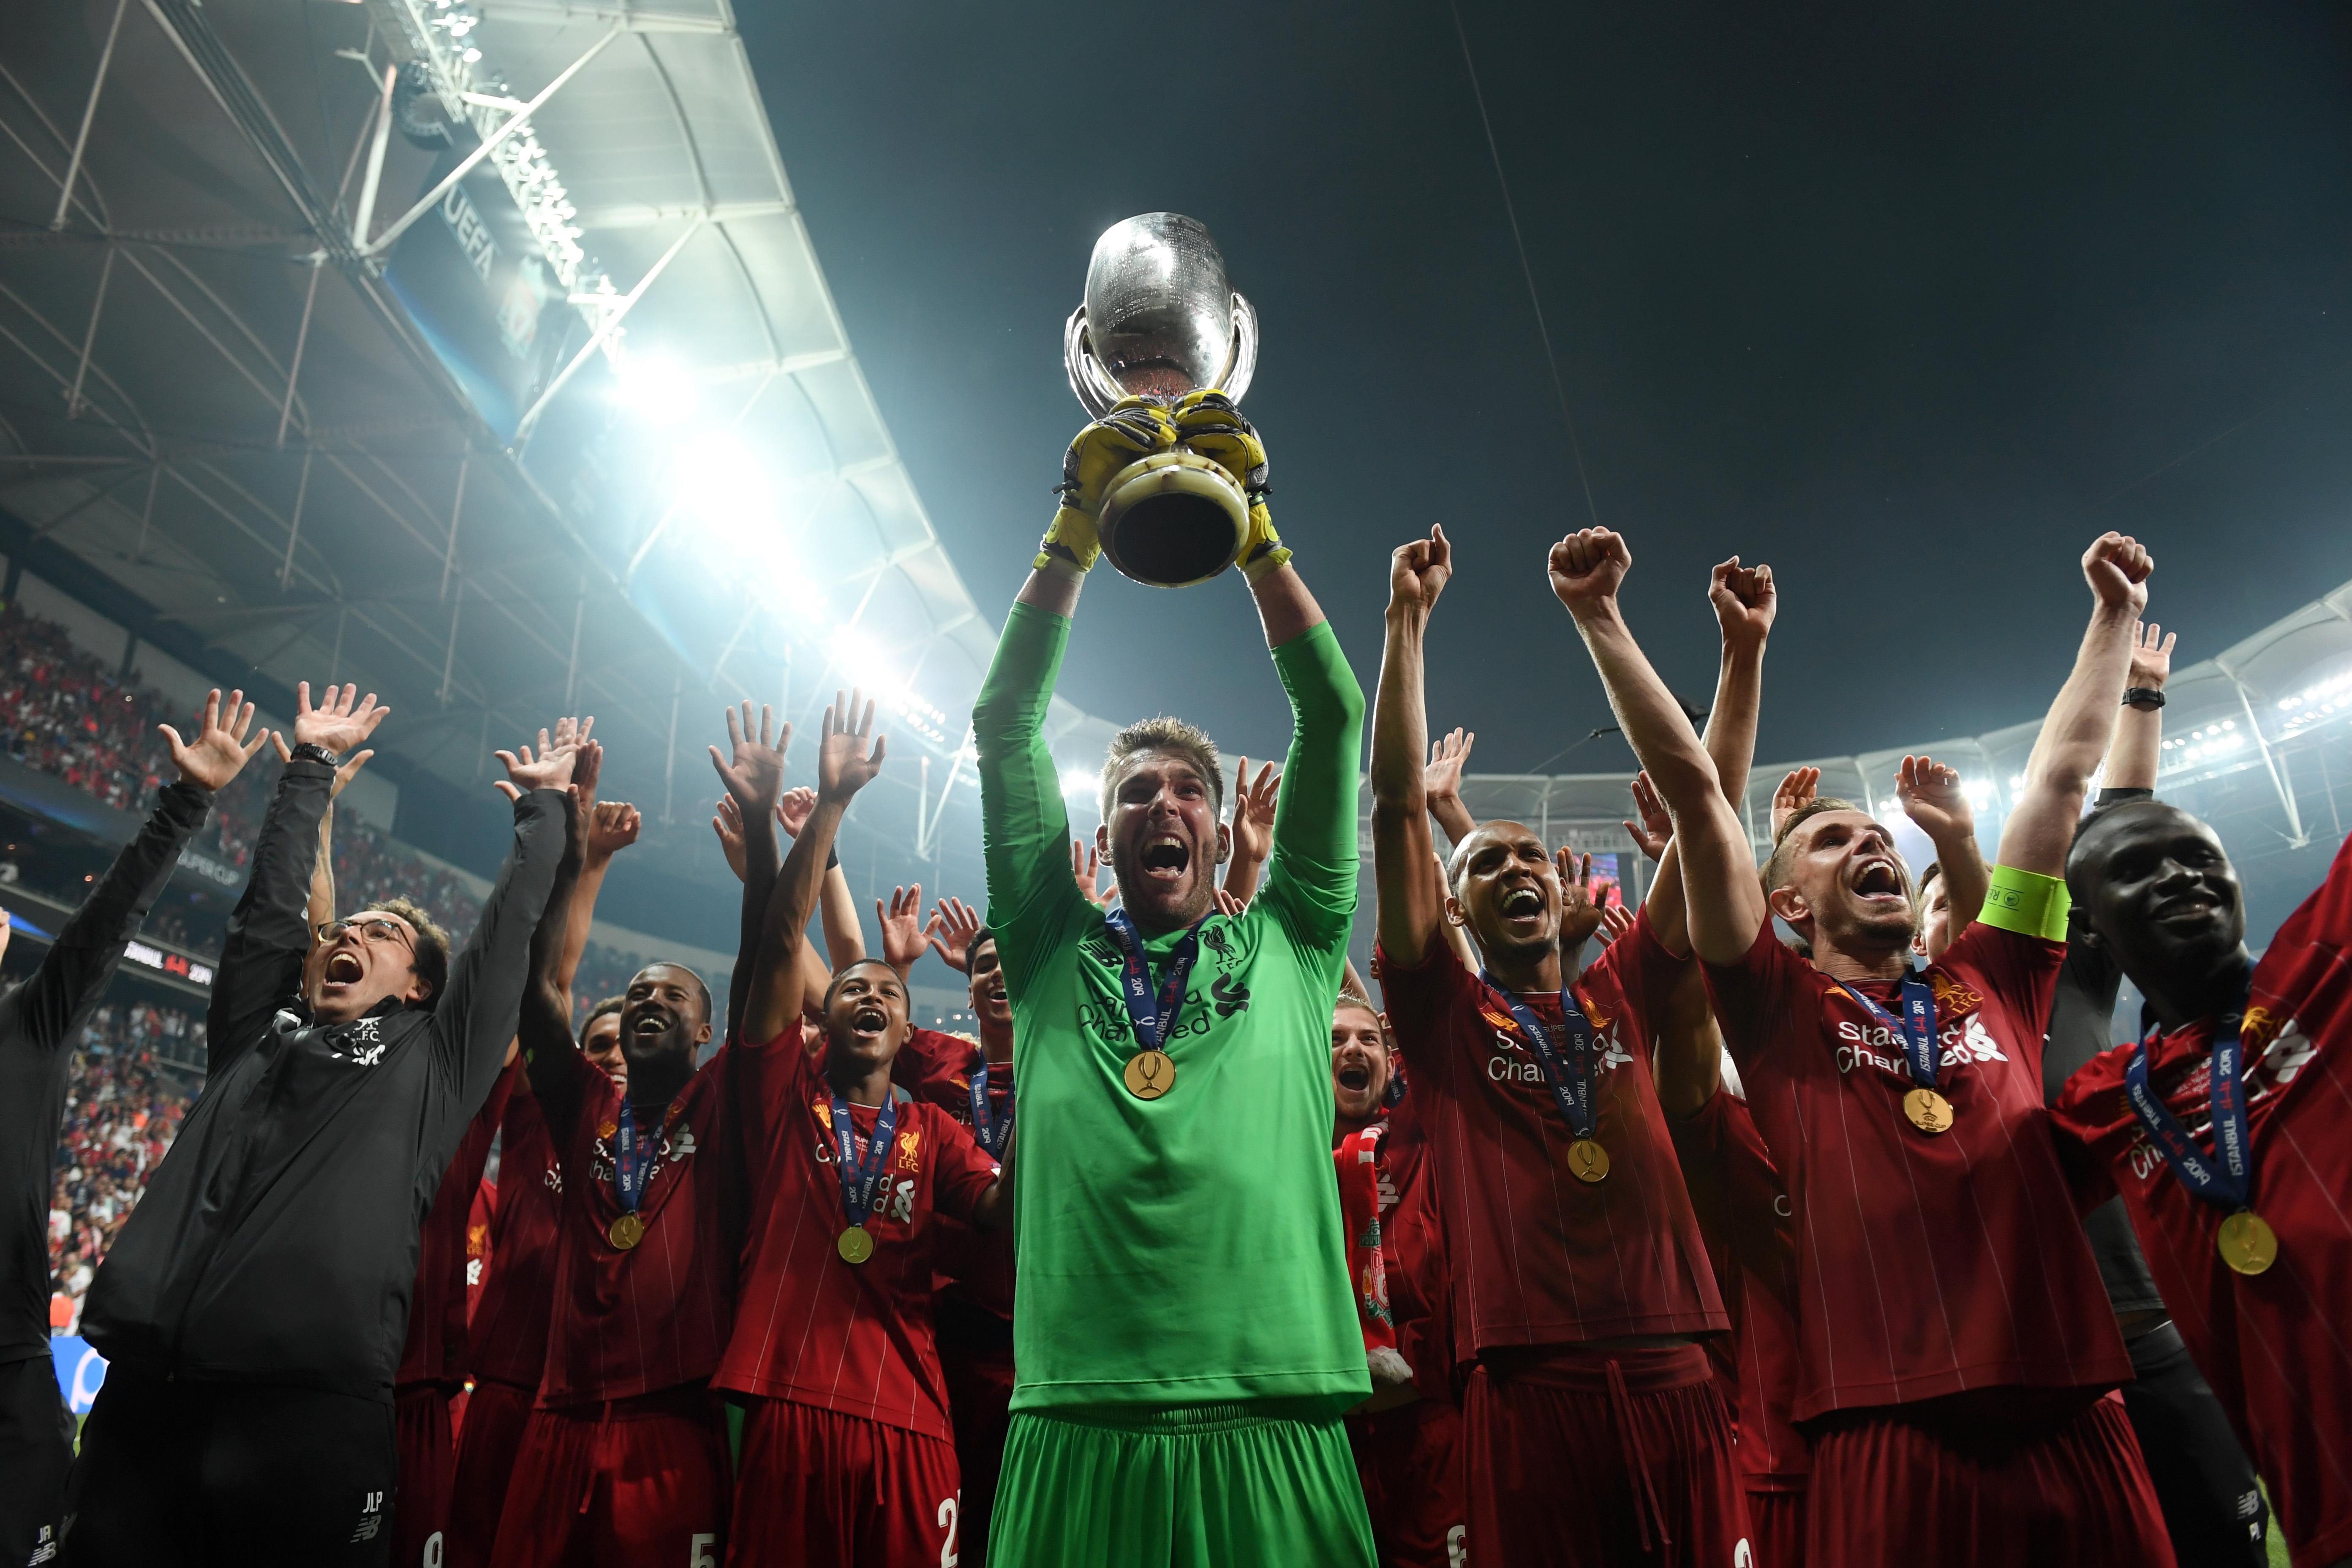 ISTANBUL, TURKEY - AUGUST 14: Adrian of Liverpool lifts the UEFA Super Cup trophy as Liverpool celebrates victory following the UEFA Super Cup match between Liverpool and Chelsea at Vodafone Park on August 14, 2019 in Istanbul, Turkey. (Photo by Michael Regan/Getty Images)